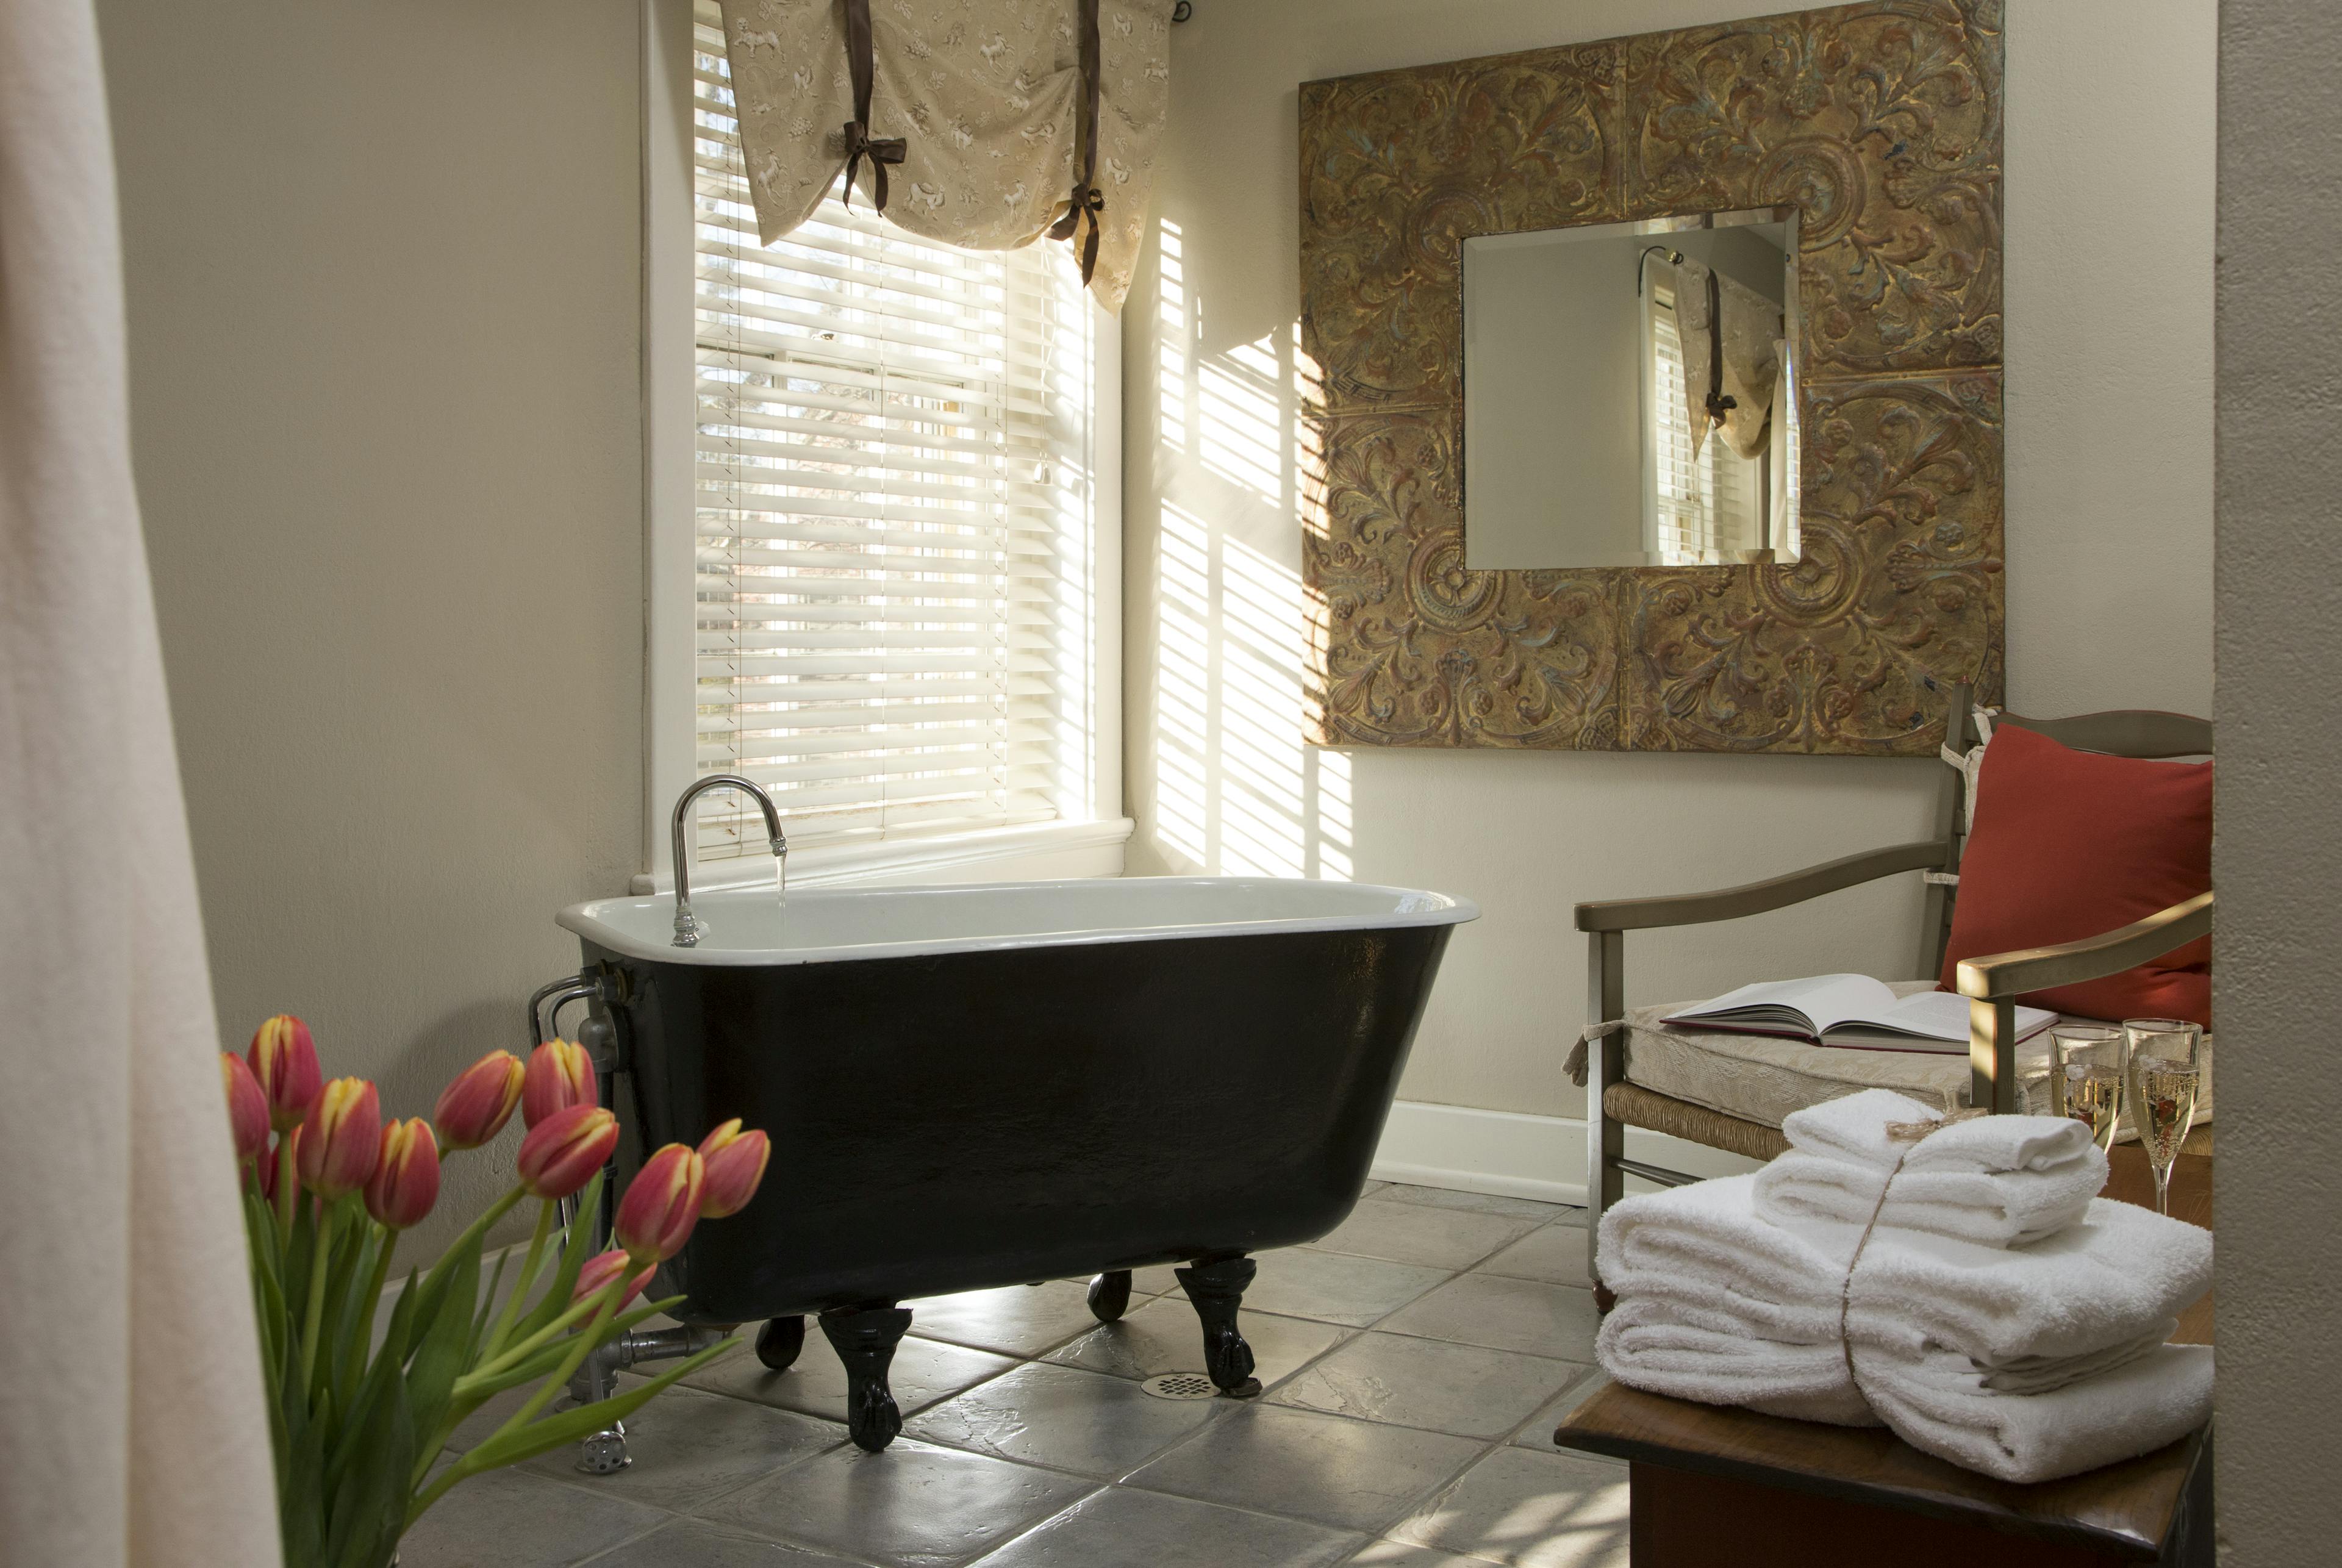 Clawfoot soaking tub on tiled floor, sunny window with blinds and valance, ornately framed mirror, and comfortable chair